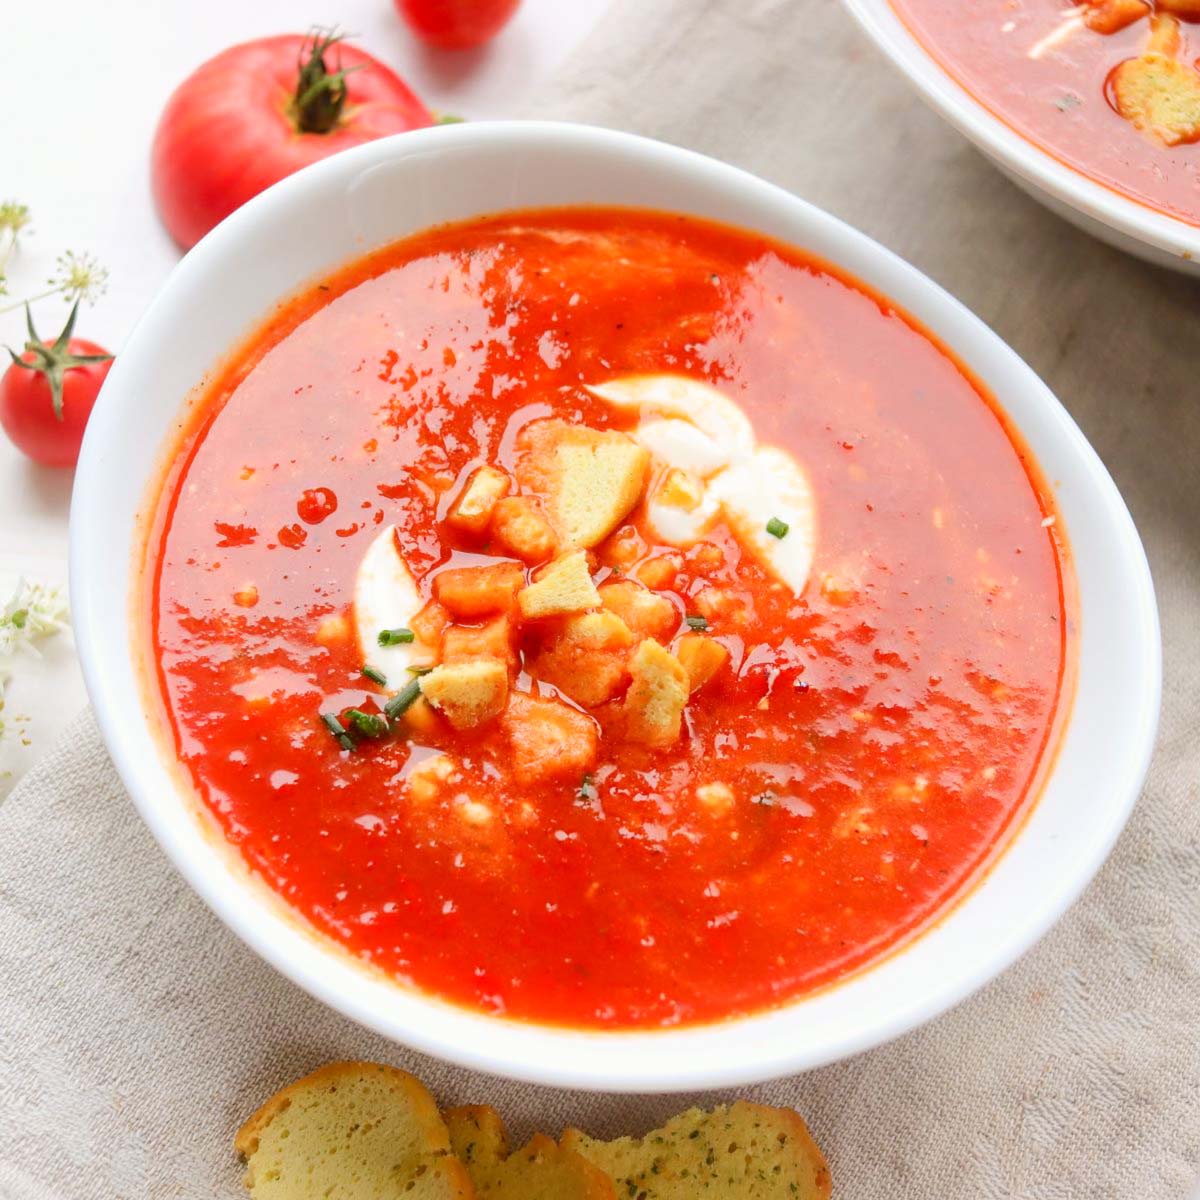 Thumbnail of low calorie red pepper and tomato soup.